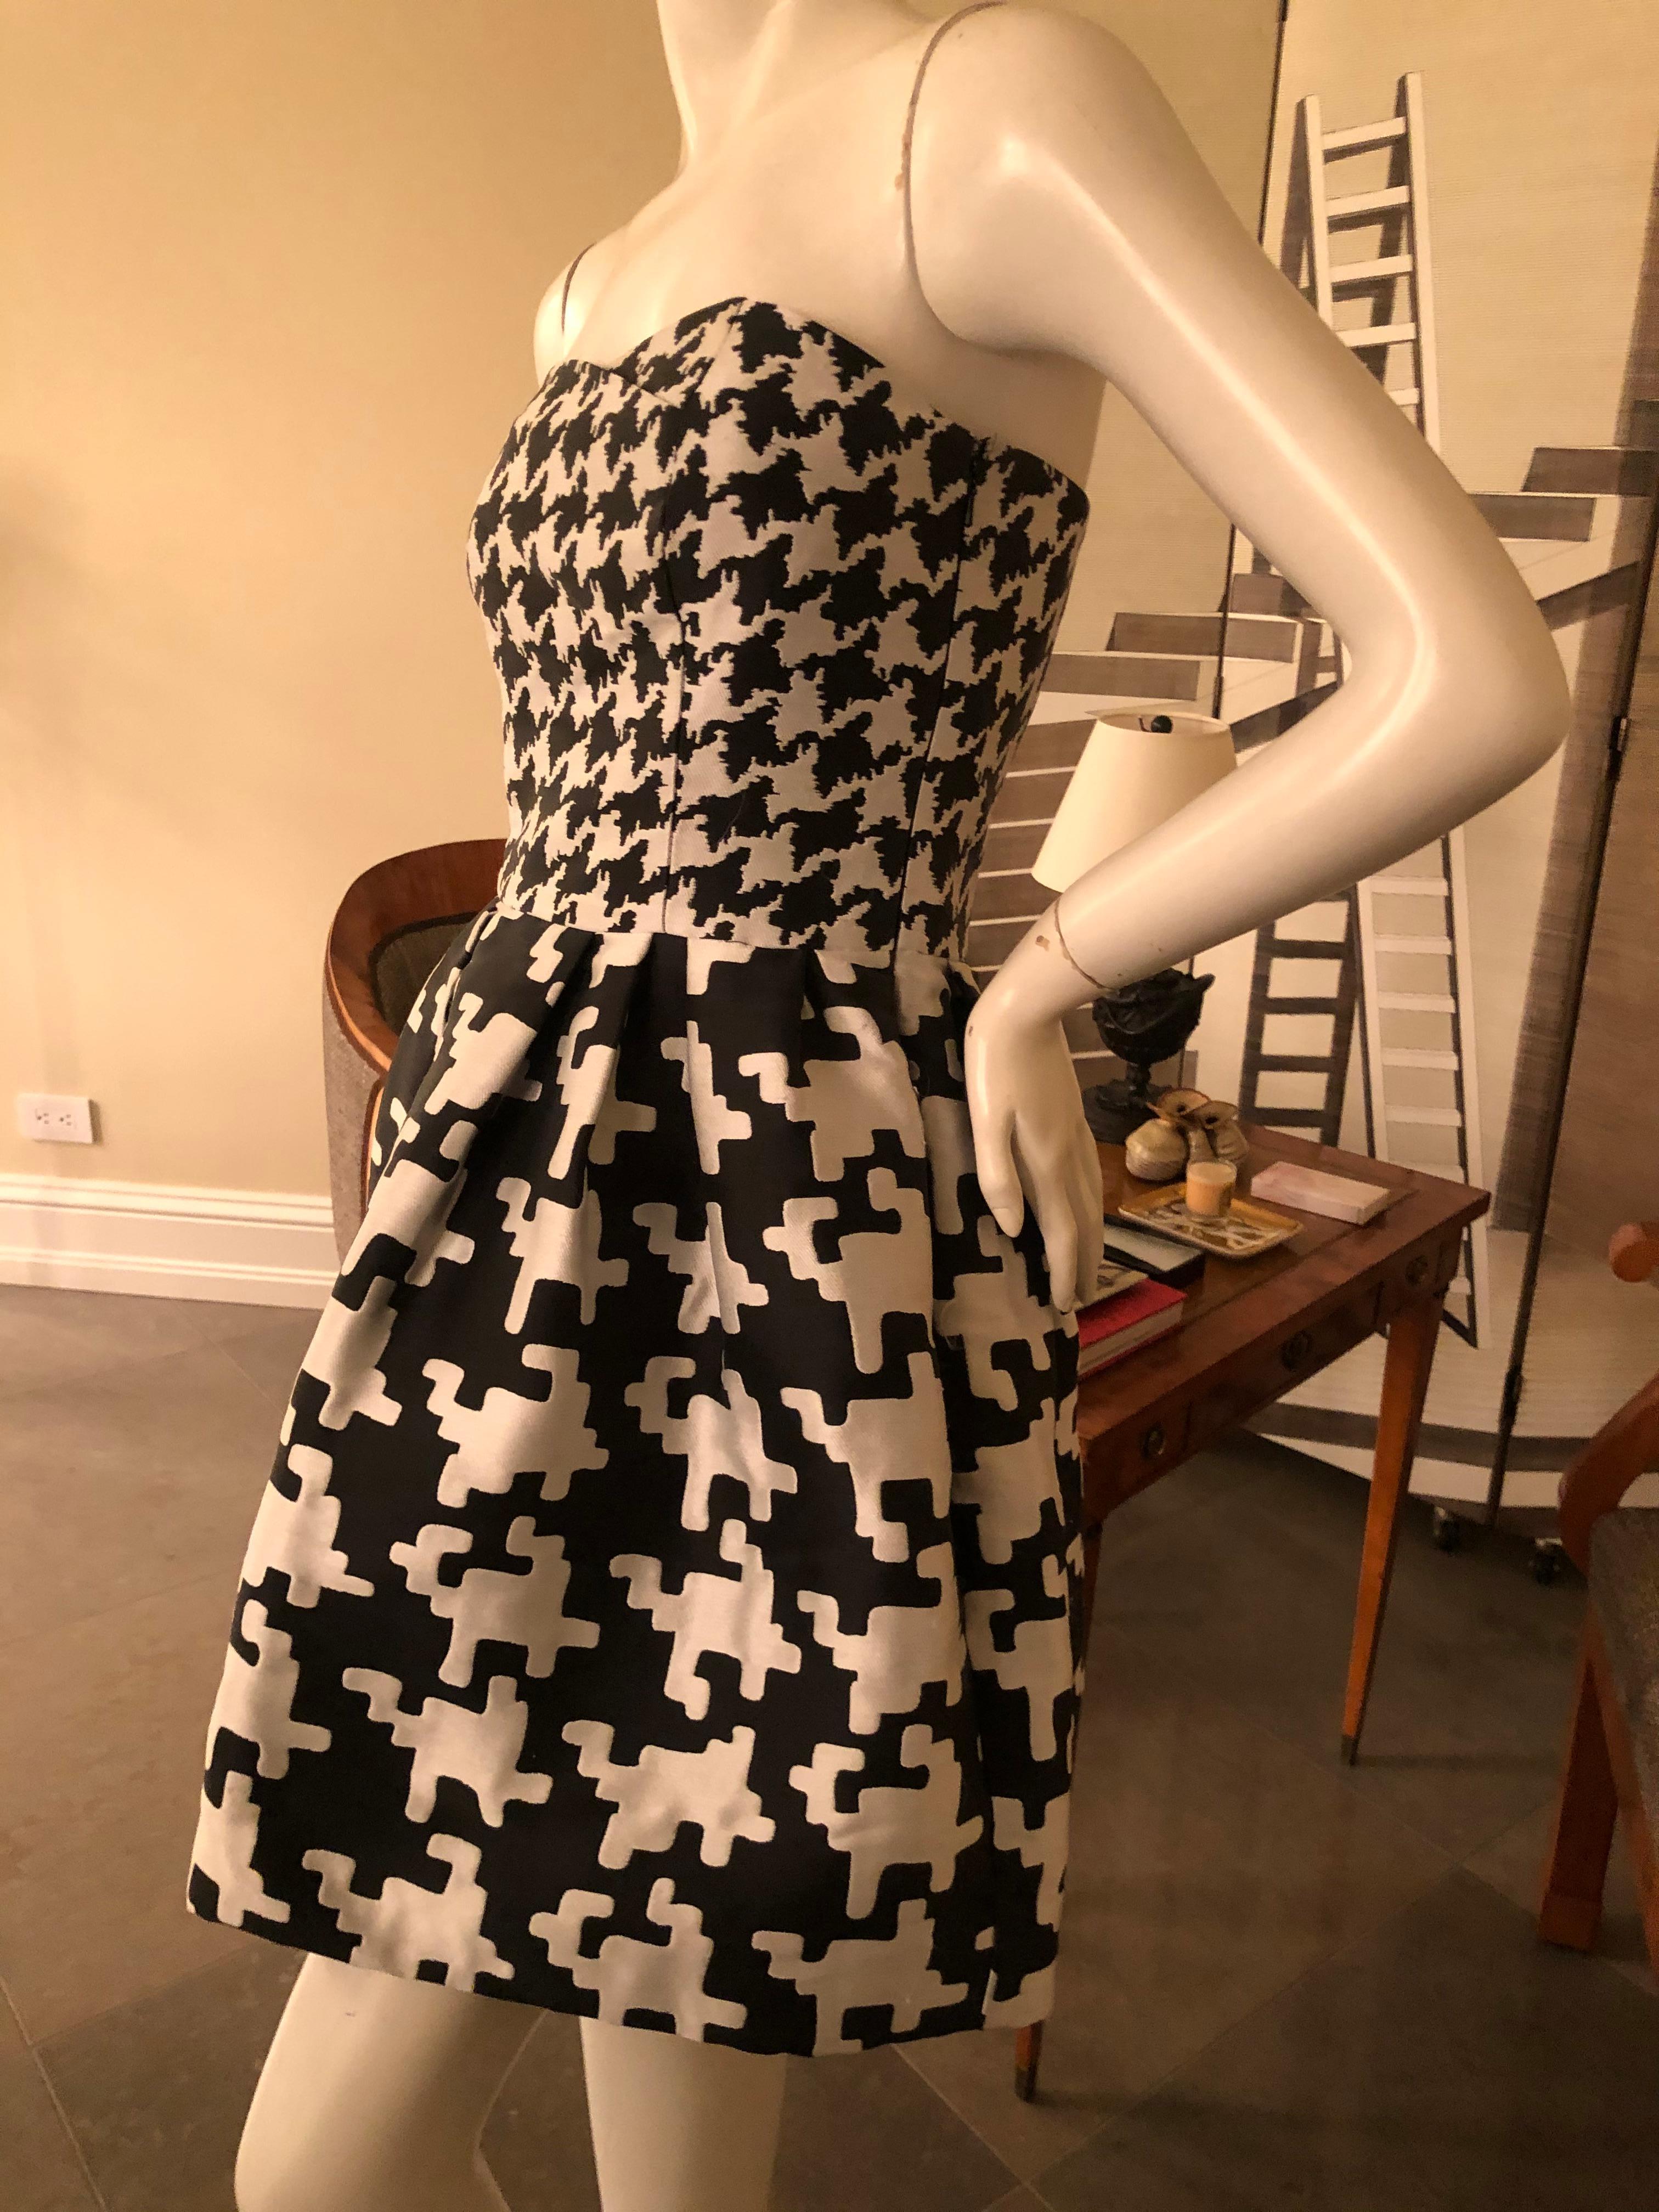  Moschino Strapless Exaggerated Houndstooth Corset Cocktail Dress .
So good, please use the zoom feature to see details.
Size 6 US
Bust 34